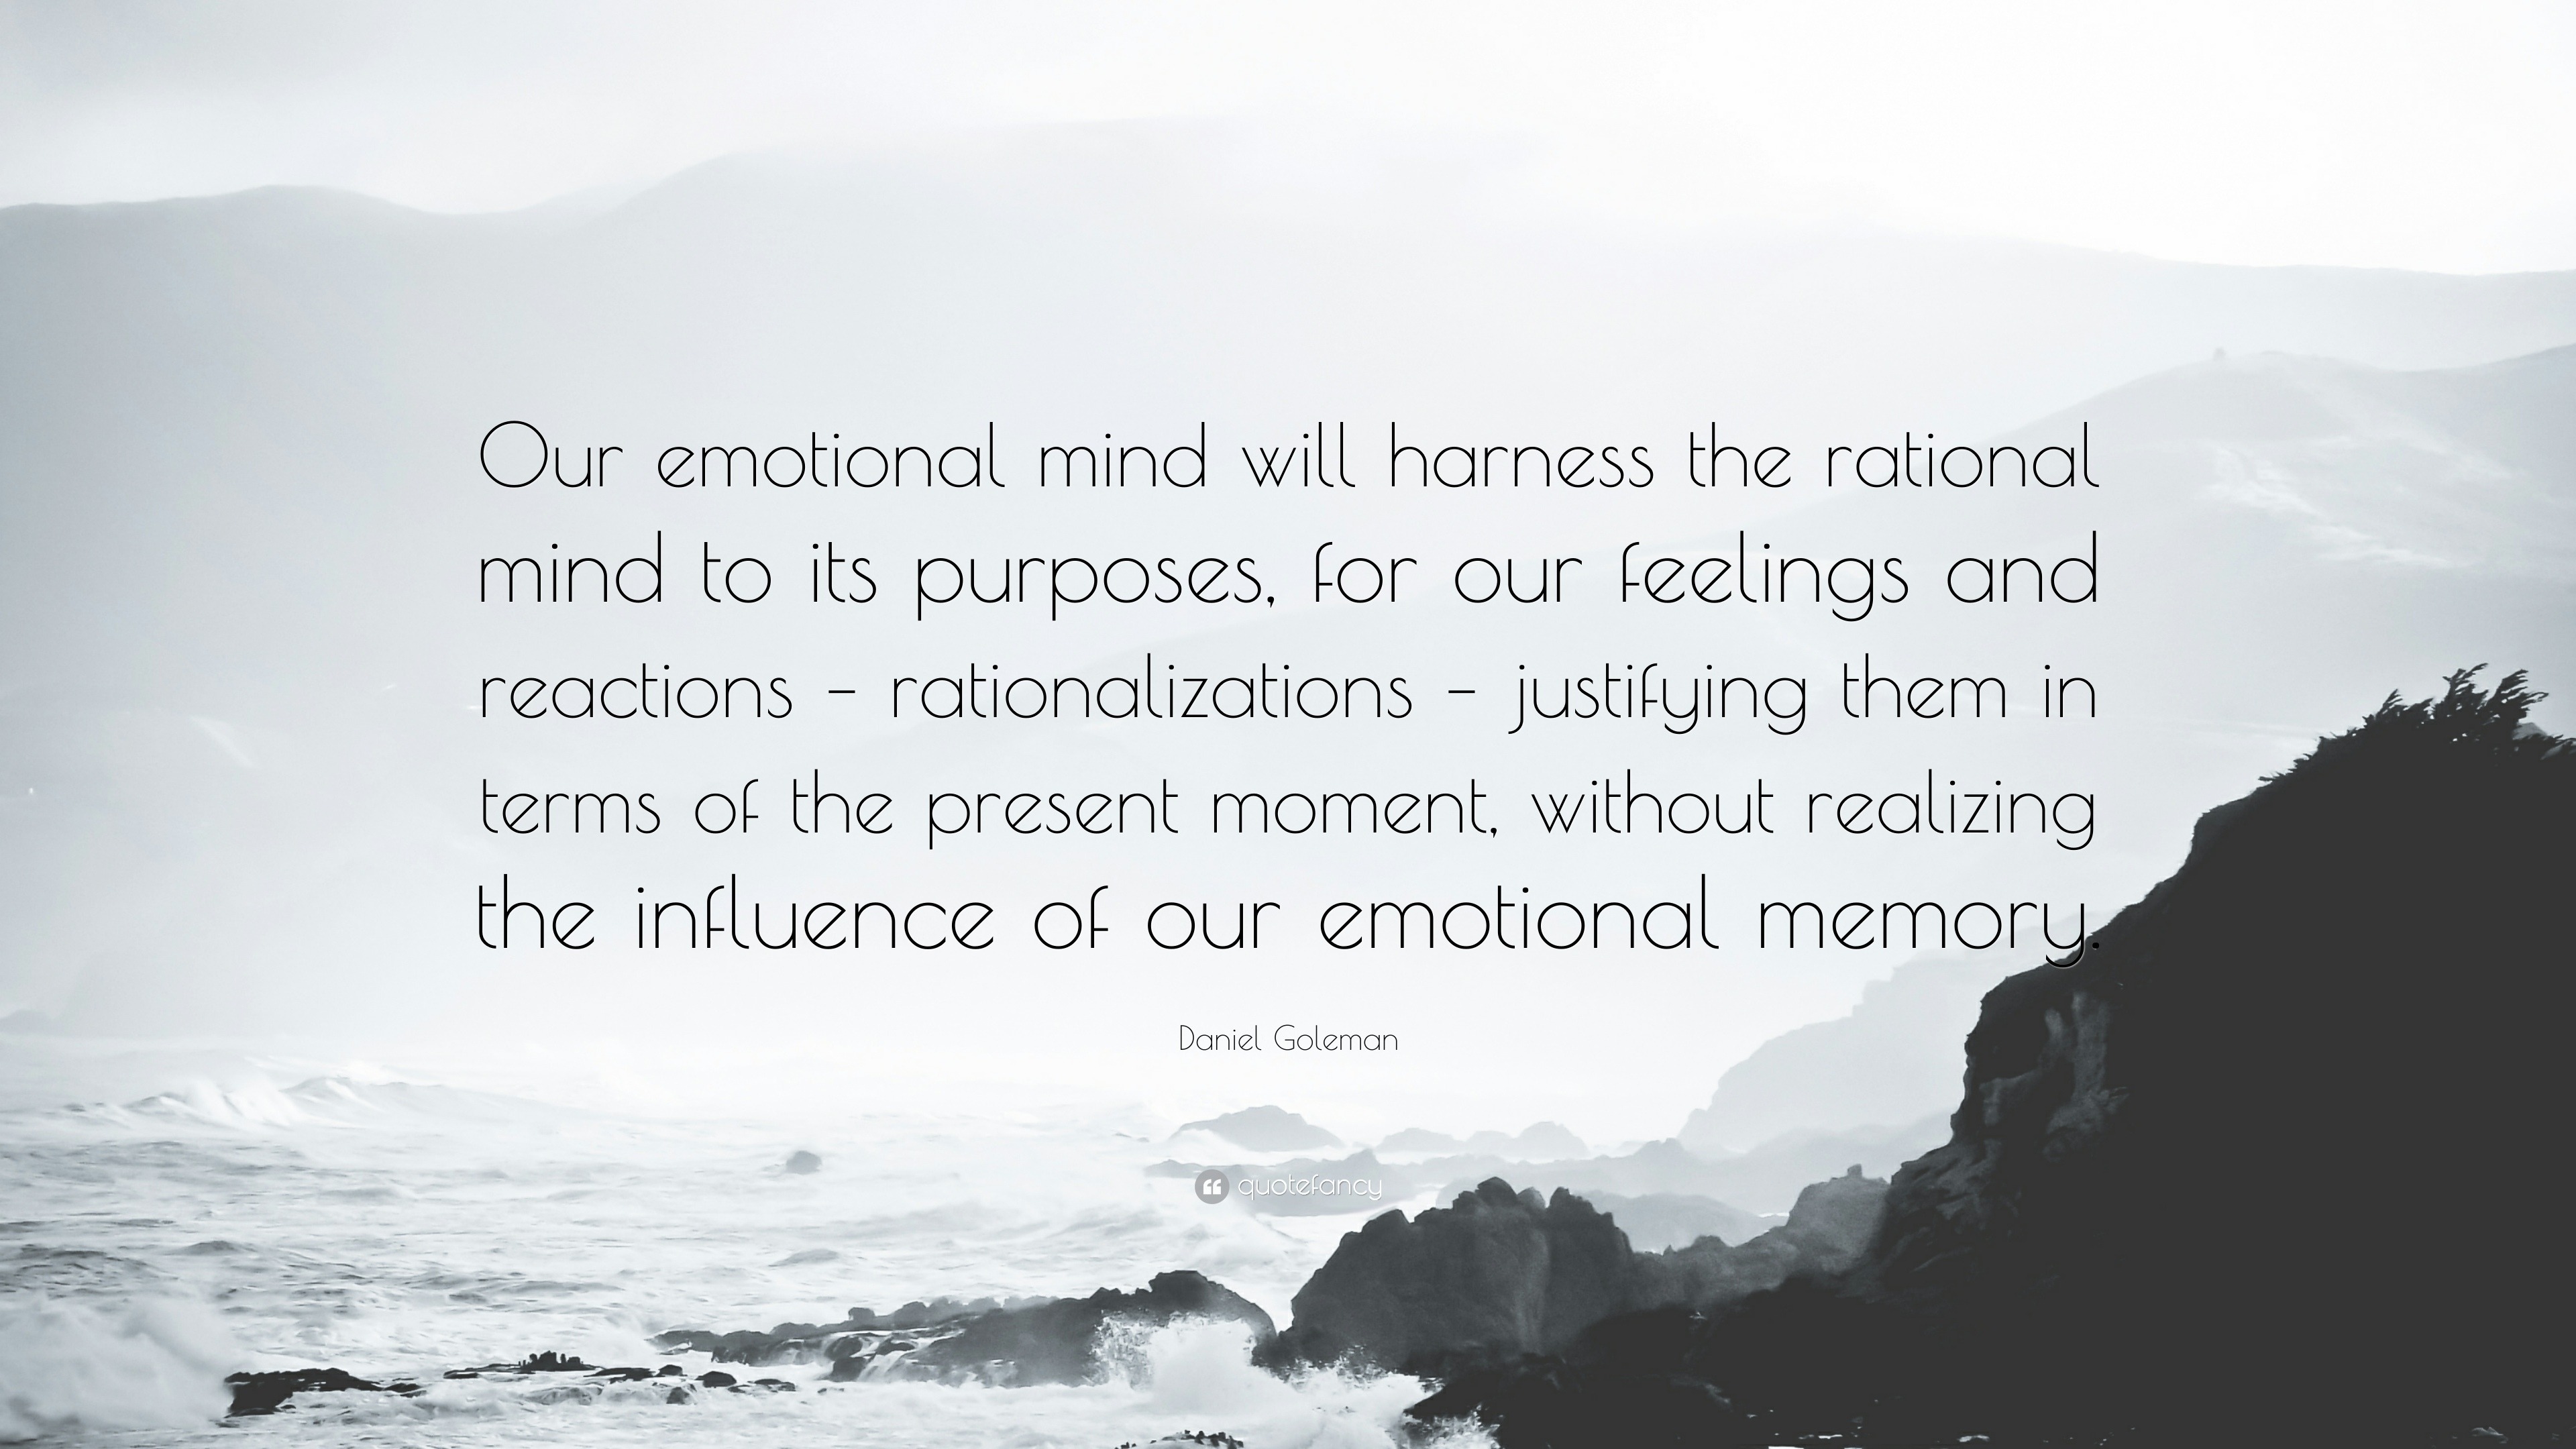 Daniel Goleman Quote: “Our emotional mind will harness the rational mind to  its purposes, for our feelings and reactions – rationalizations – j...”